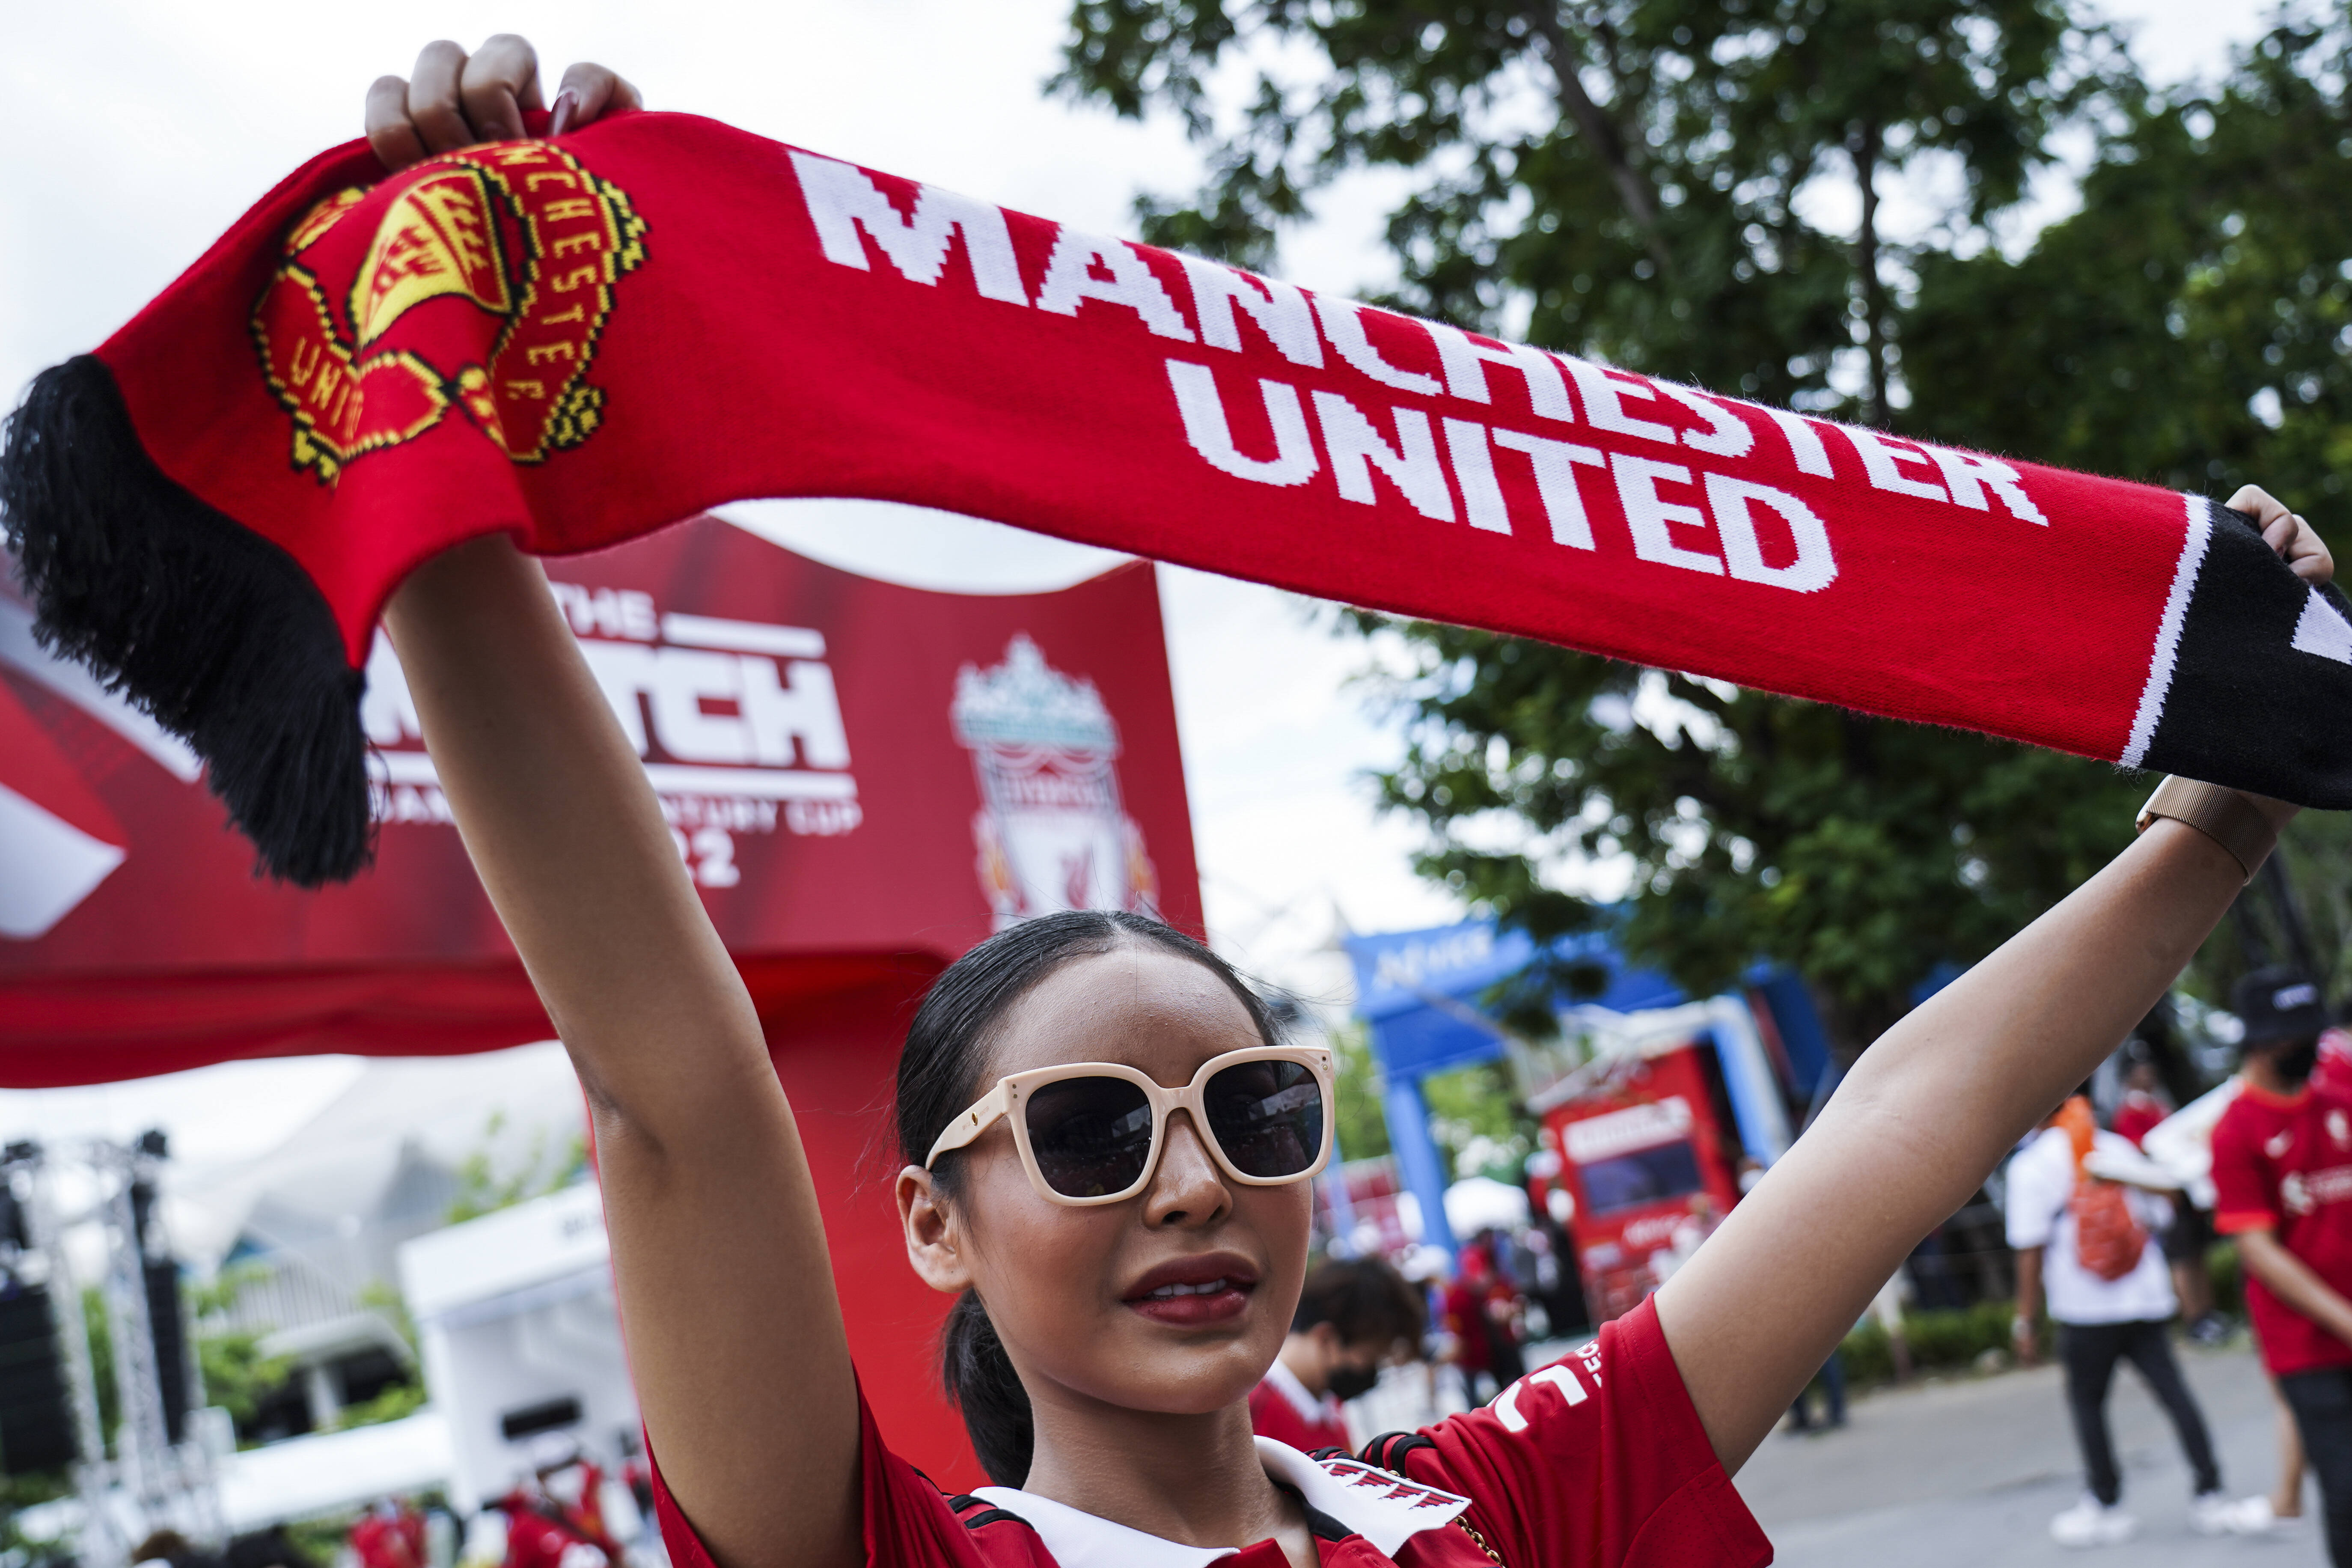 A Manchester United fan pictured proudly holding a club scarf ahead of her team's pre-season win over Liverpool in Bangkok in July 2022